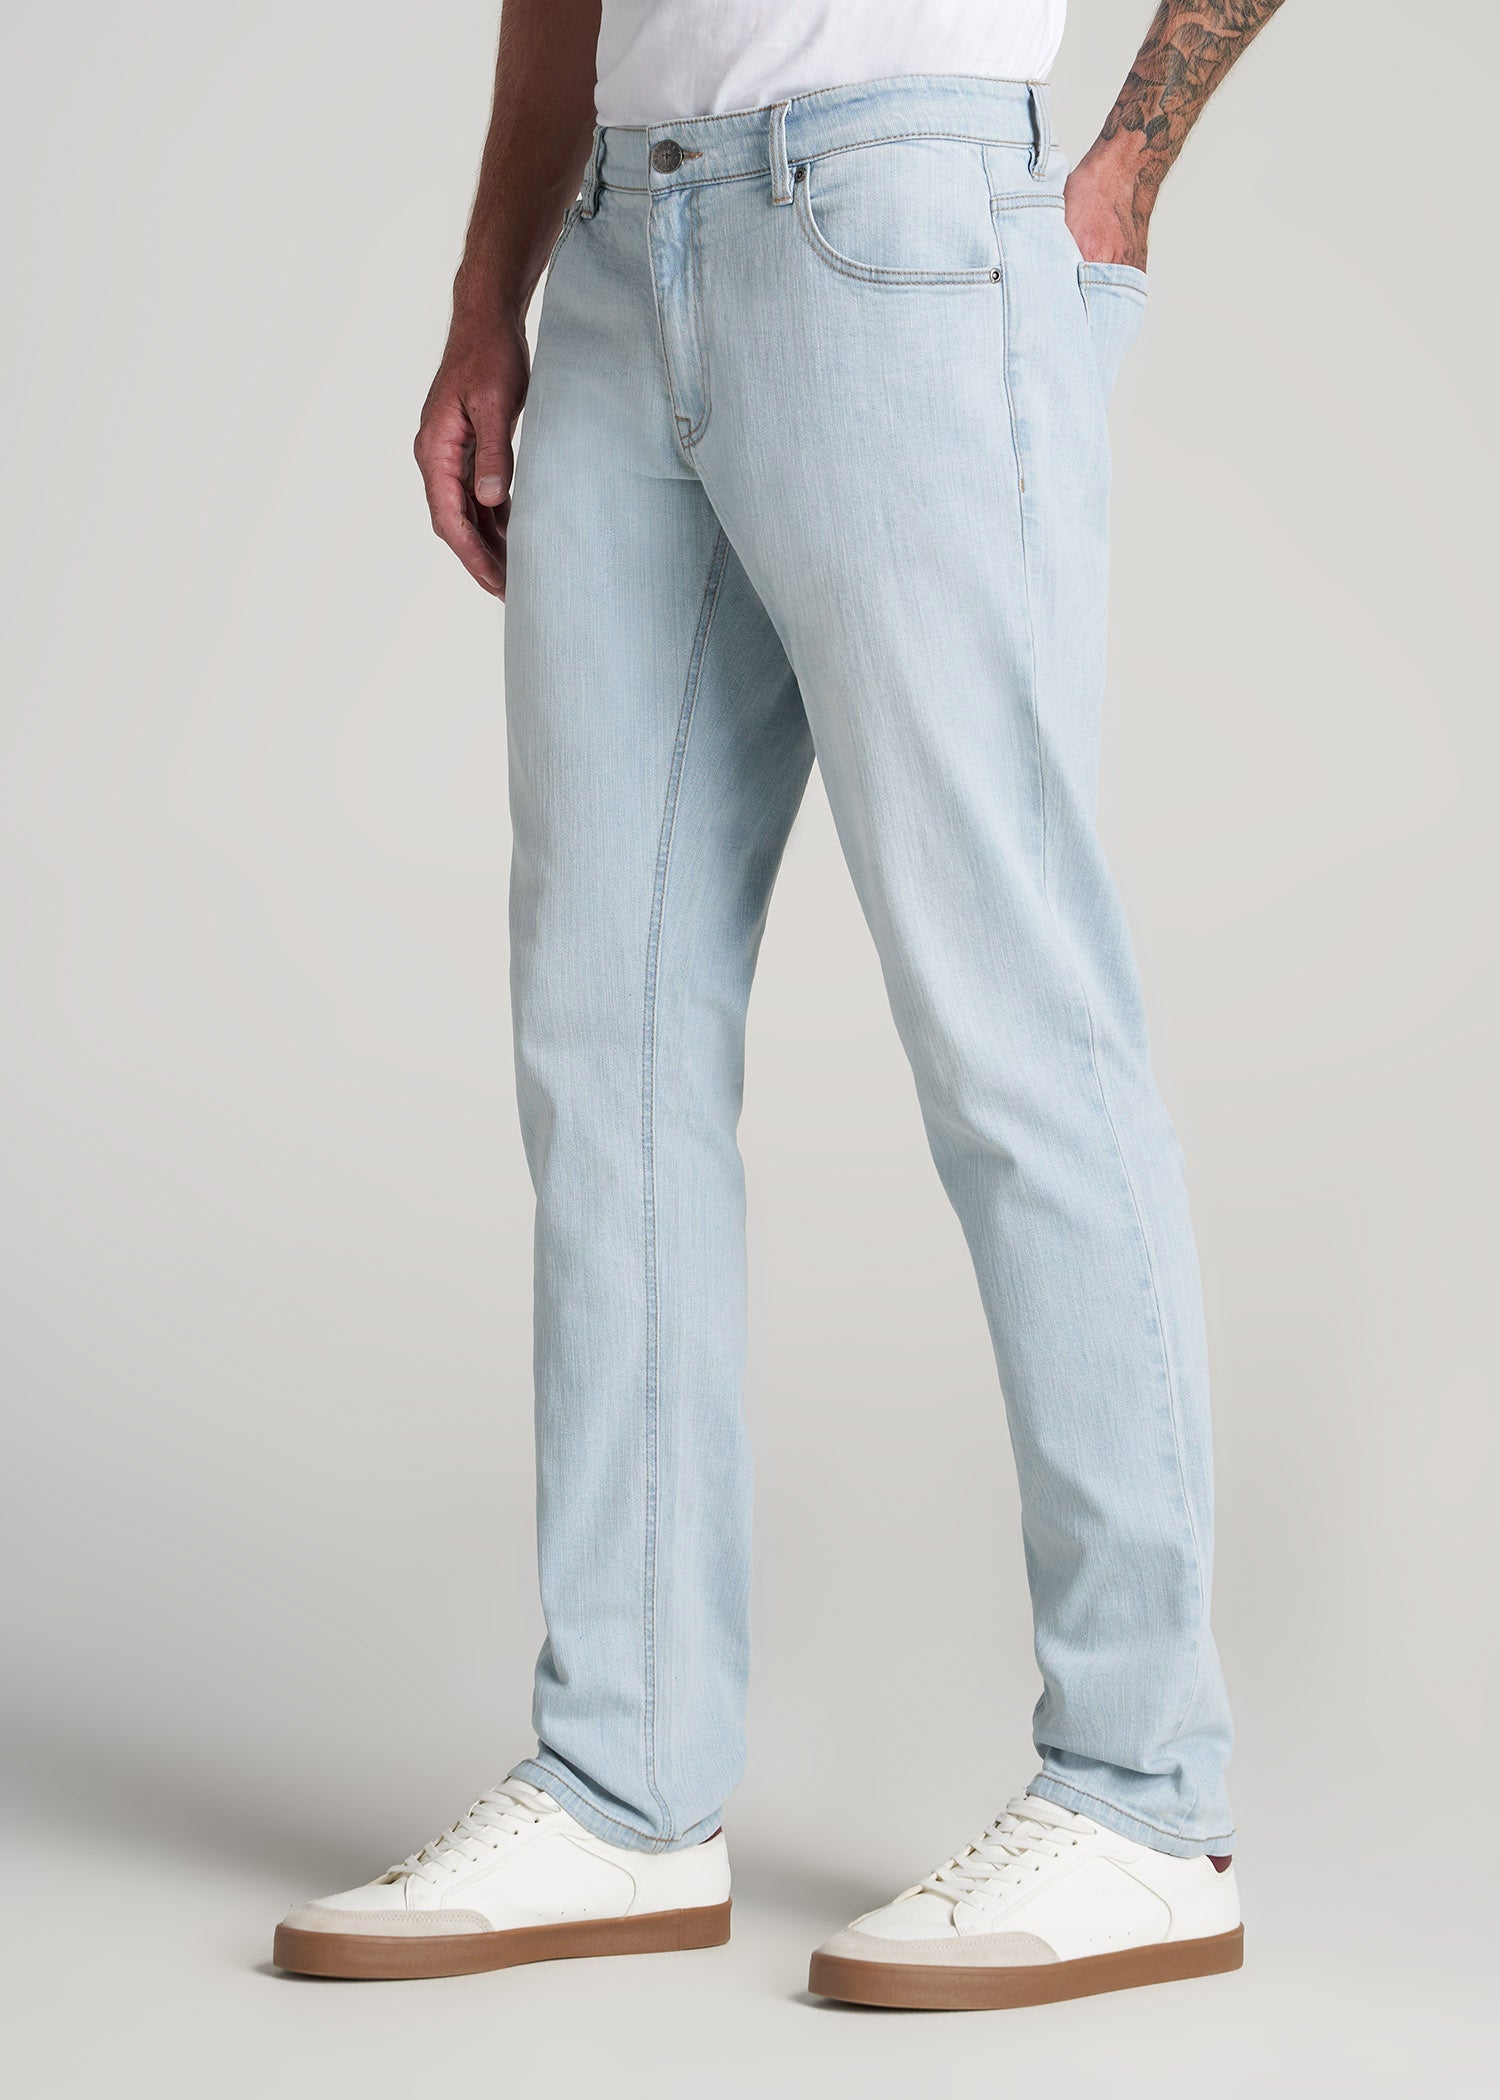 Carman Tapered Jeans For Tall Men California Blue | American Tall